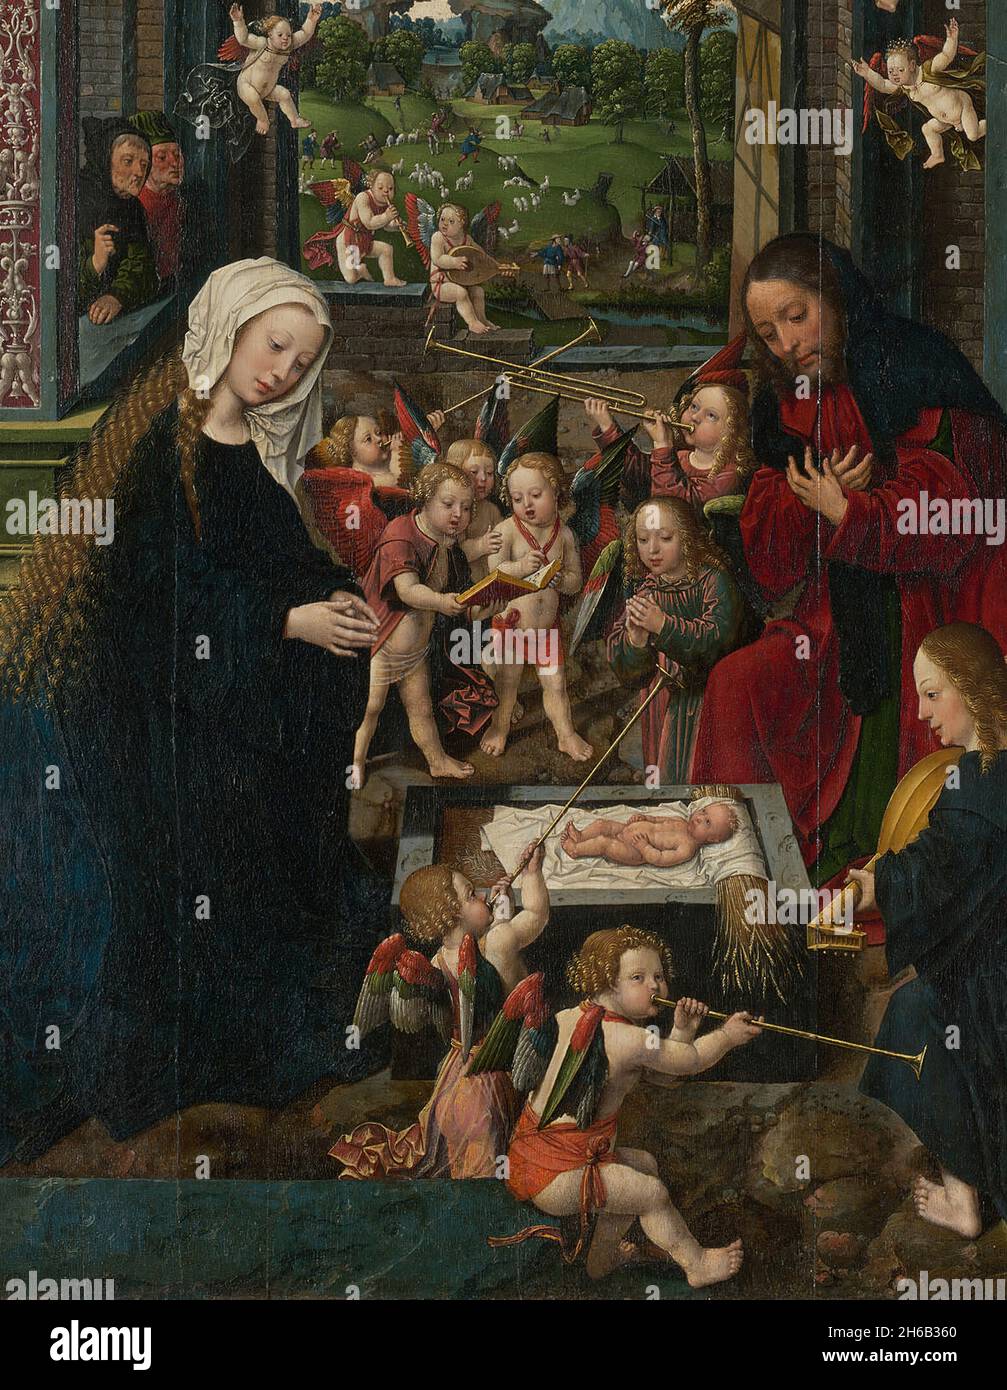 The Adoration of the Christ Child, c. 1515. Detail from a larger artwork. Stock Photo